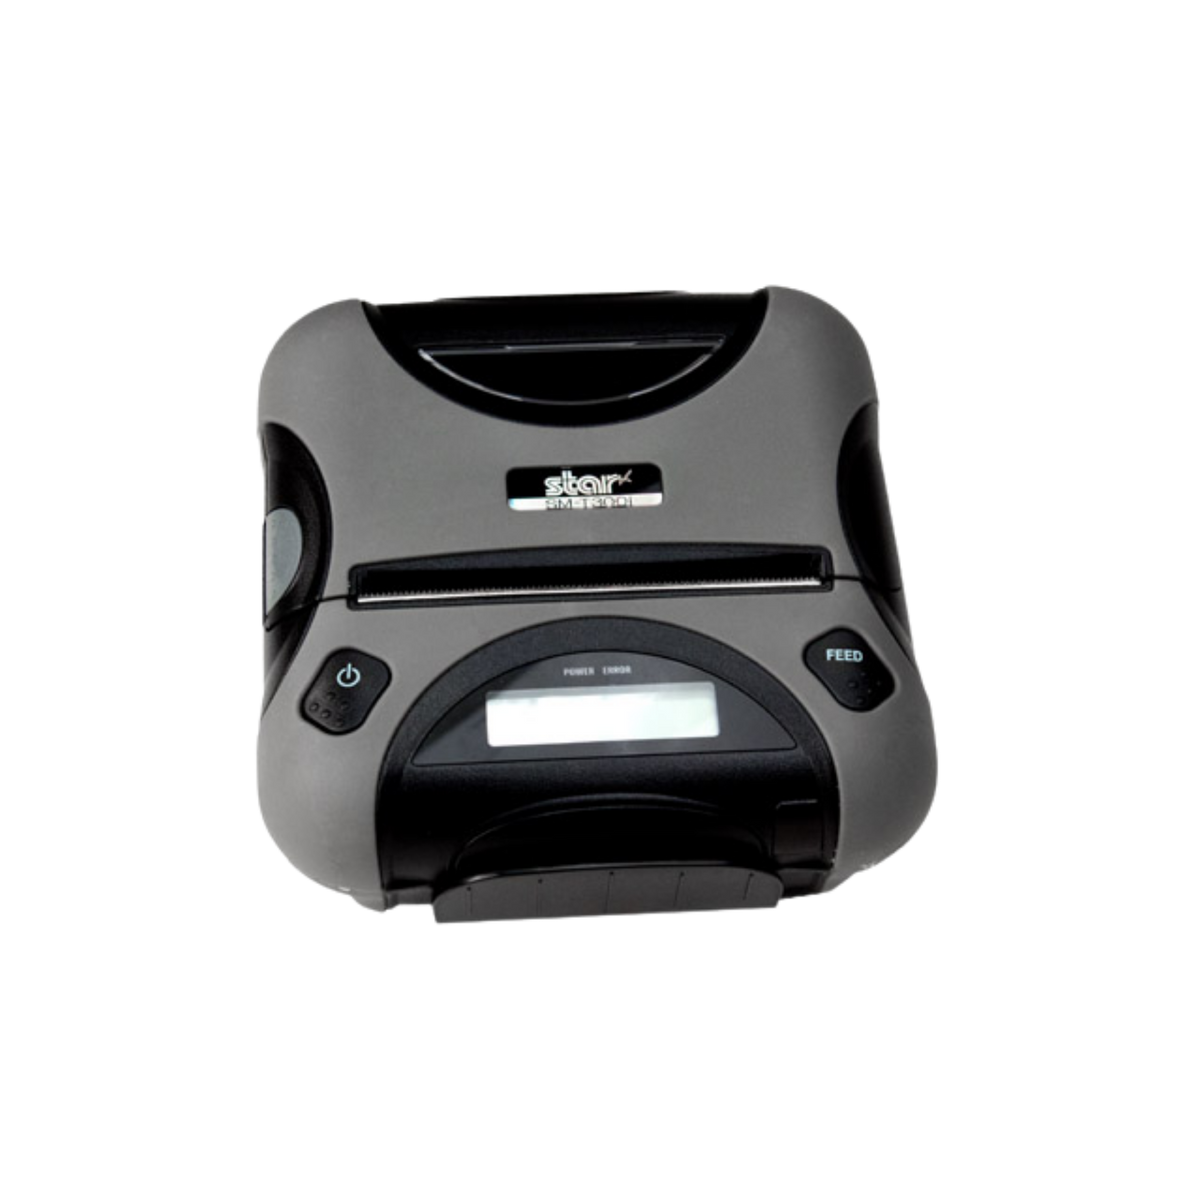 Star Micronics, Sm-T300i Series, Mobile Thermal Receipt Printer with Tear Bar, Bluetooth, Supports iOS, Android, Windows